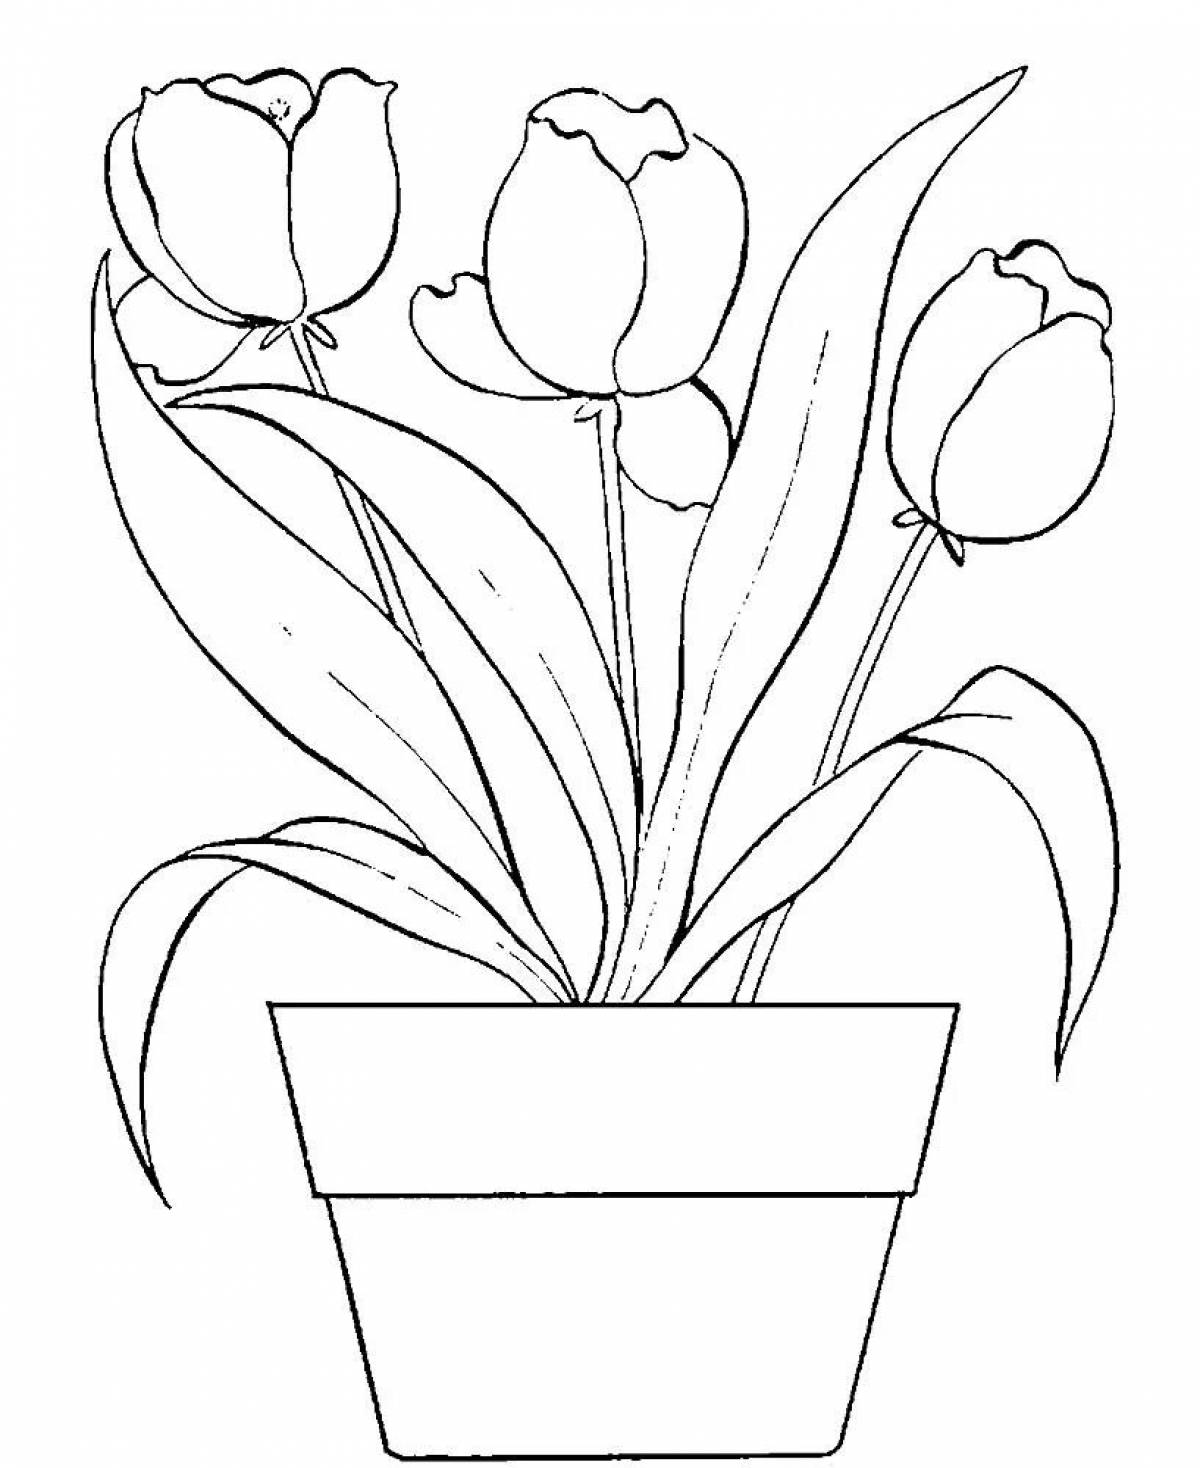 Elegant tulips coloring for children 5-6 years old